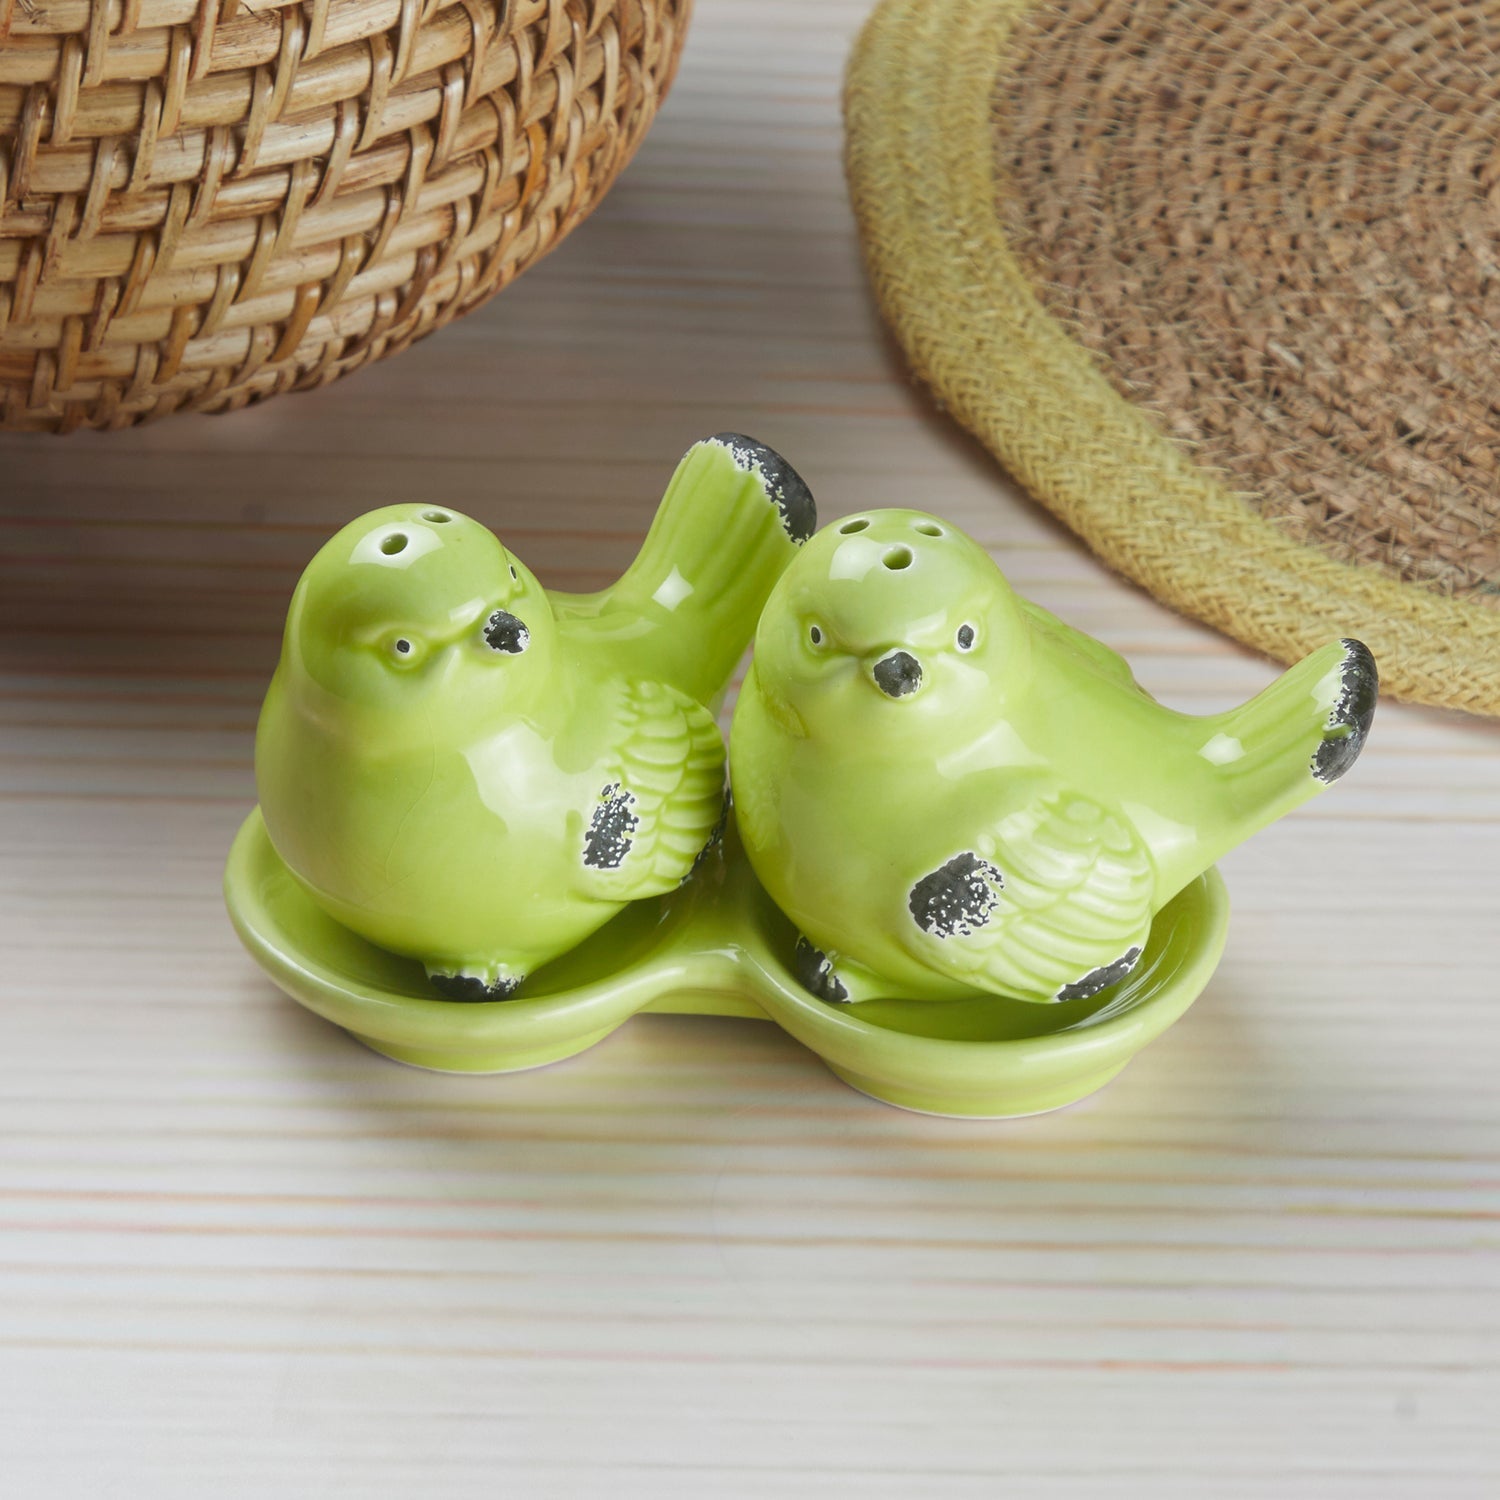 Ceramic Salt and Pepper Set with tray, Sparrow, Green (10277)